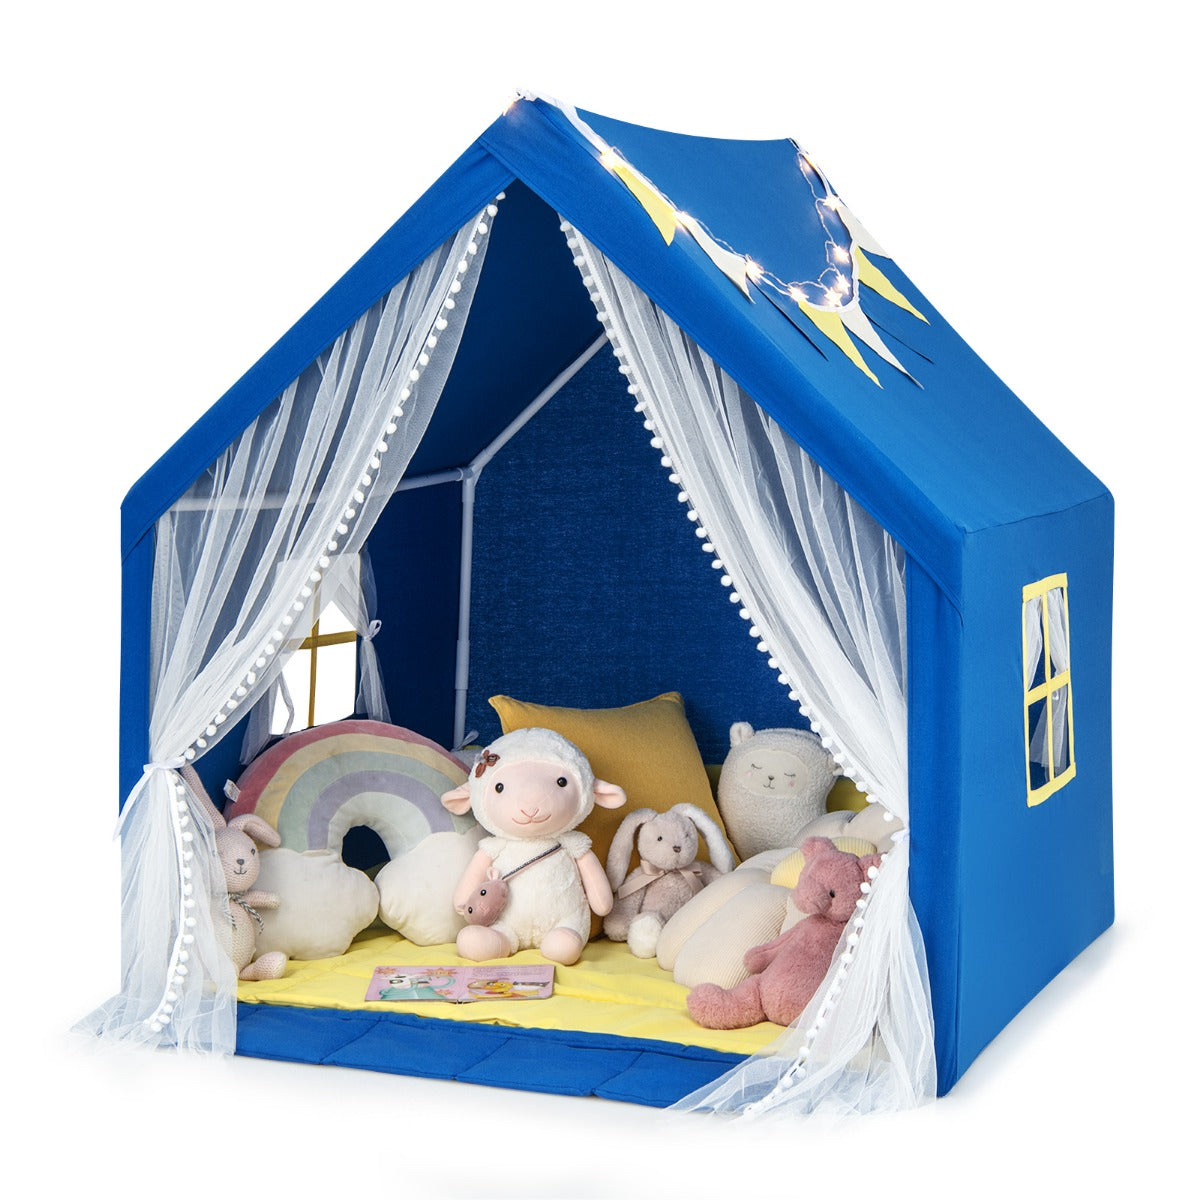 Kids and Toddlers Playhouse with Washable Cotton Mat and Star Lights and Windows-Navy